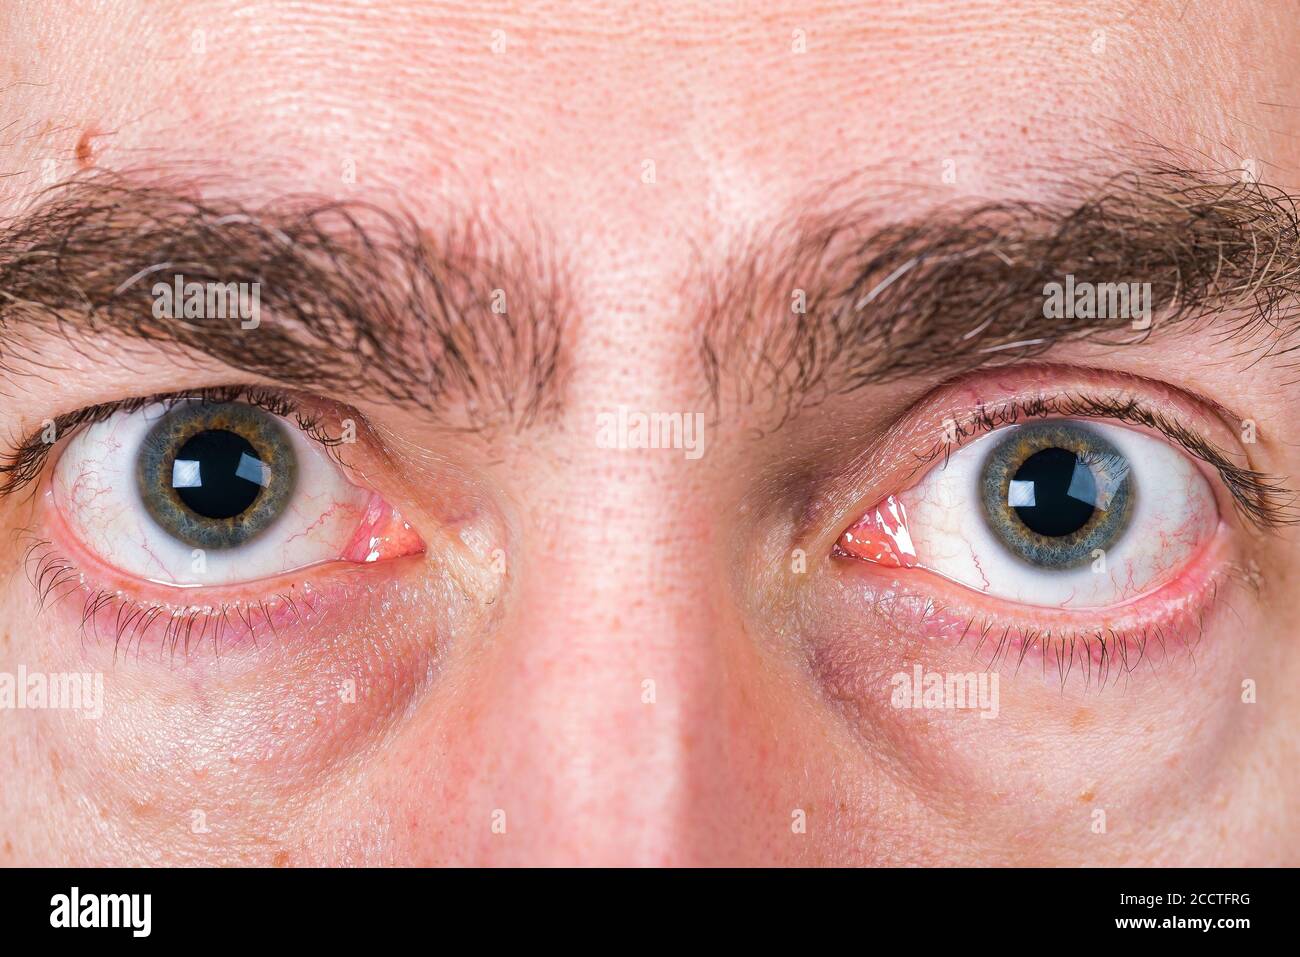 Big eyes of man with light skin and strong eyebrow and circles under eyes Stock Photo